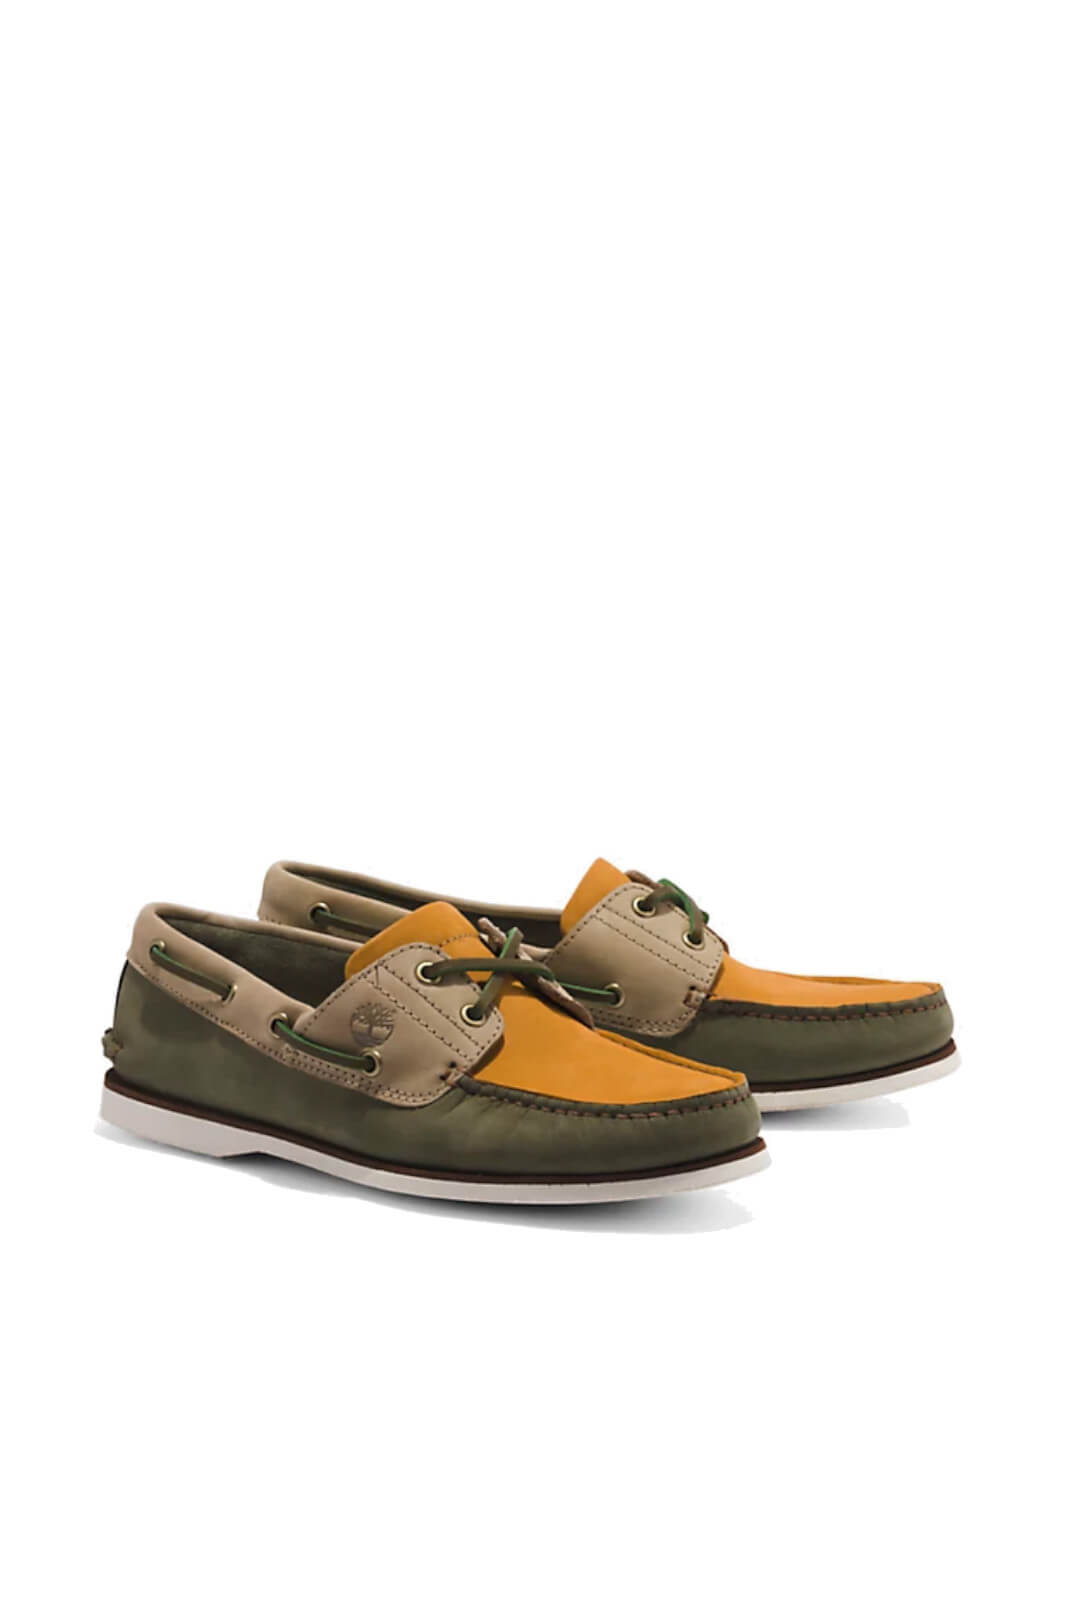 Timberland CLASSIC BOAT men's moccasins